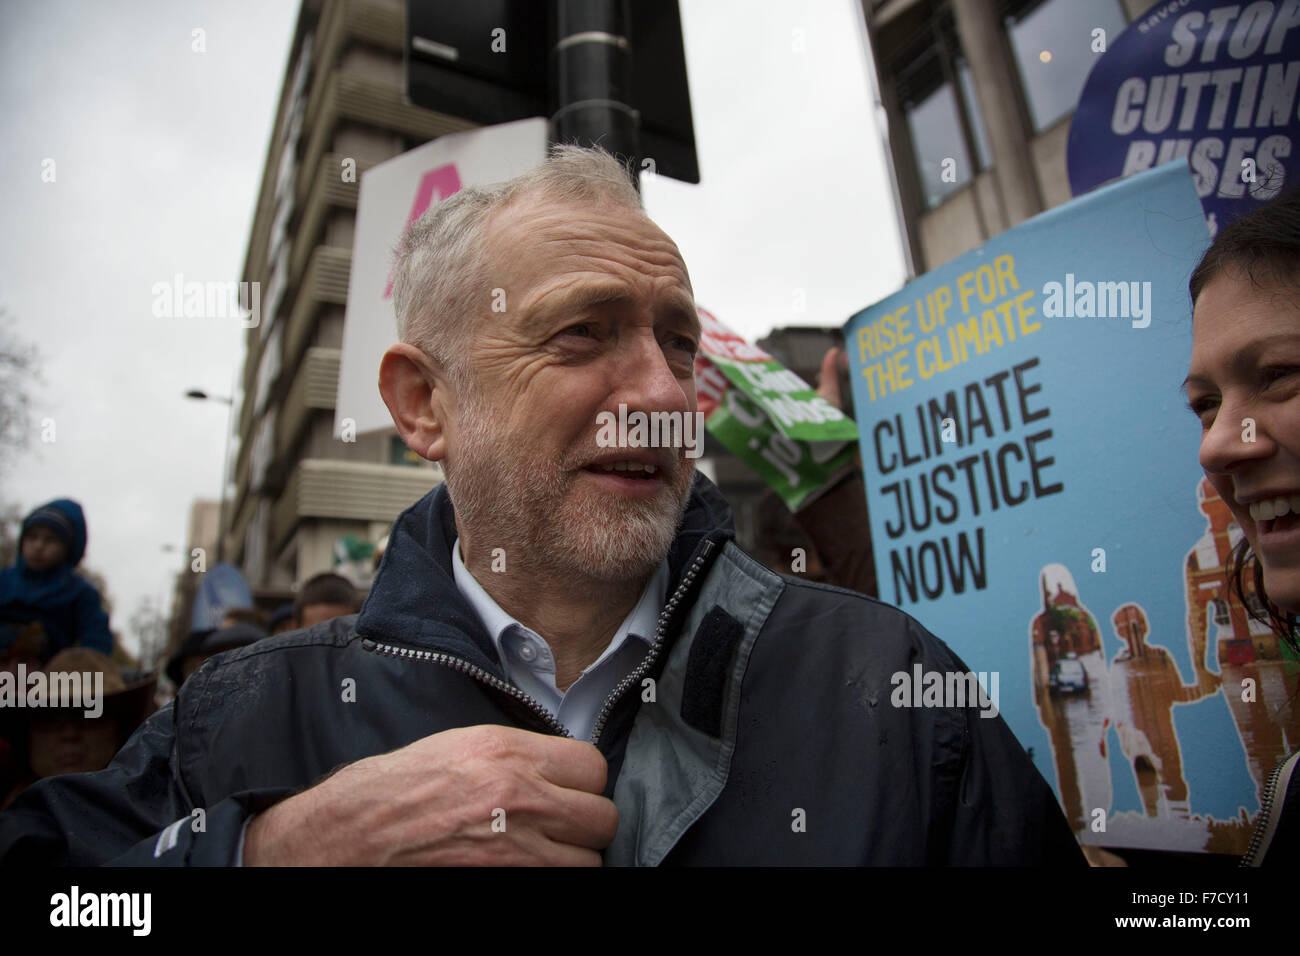 London, UK. Sunday 29th November 2015. Labour Party Leader Jeremy Corbyn attends the Peoples March for Climate Justice and Jobs demonstration. Demonstrators gathered in their tens of thousands to protest against all kinds of environmental issues such as fracking, clean air, and alternative energies, prior to Major climate change talks. Stock Photo